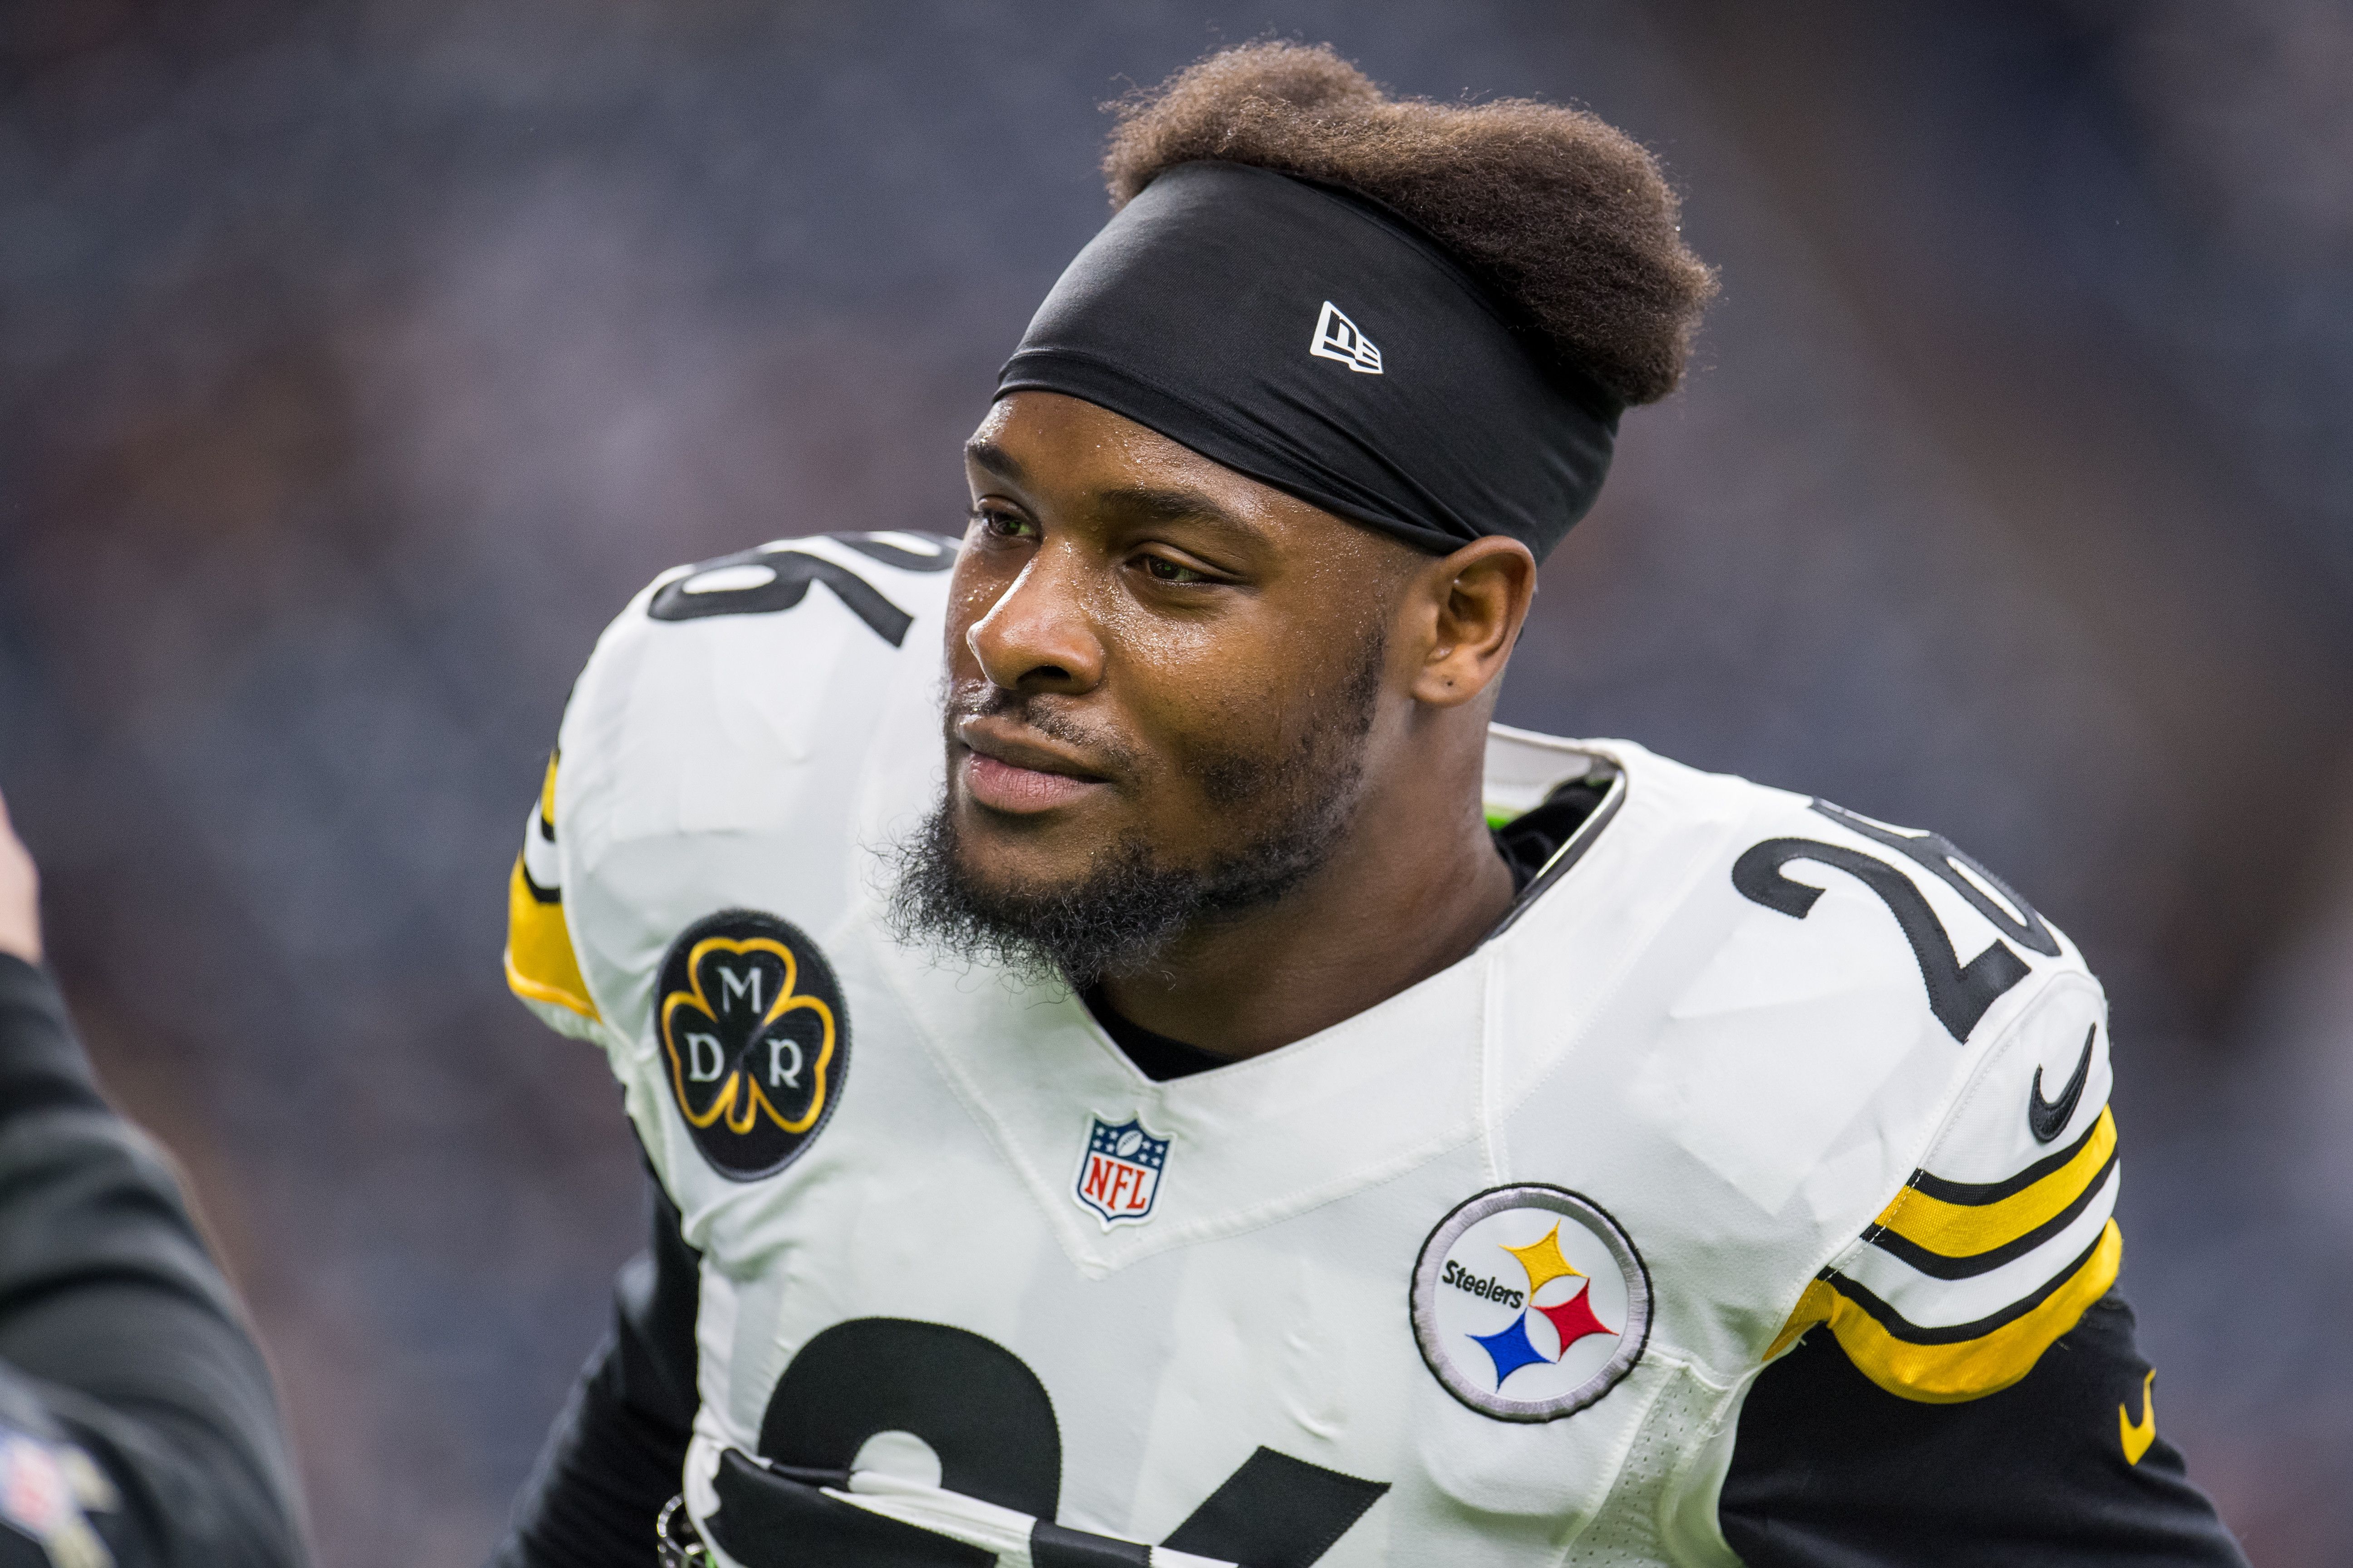 Le'Veon Bell May Retire or Sit out The Next Season if ...